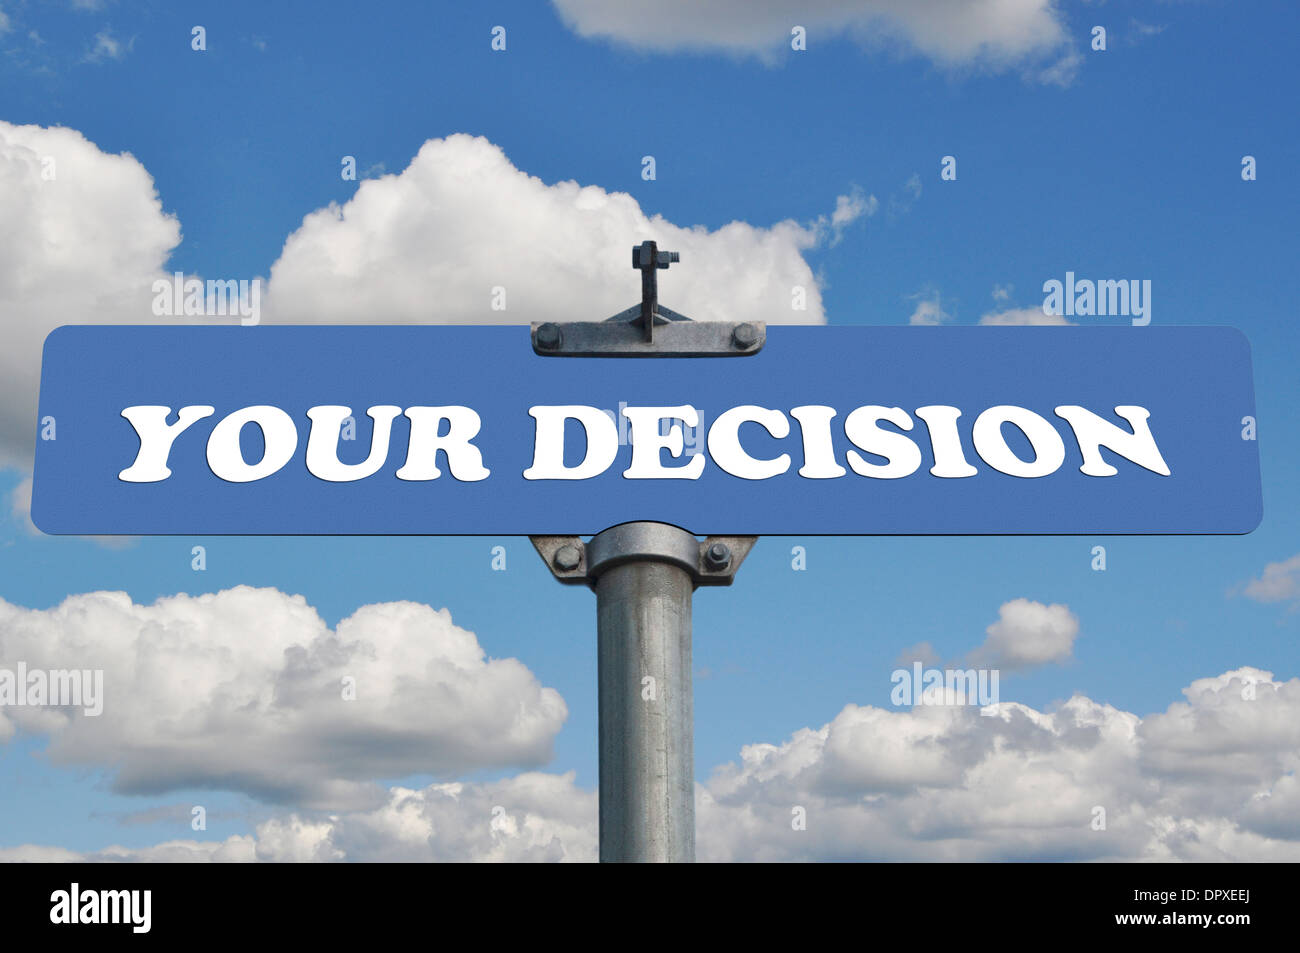 Your decision road sign Stock Photo